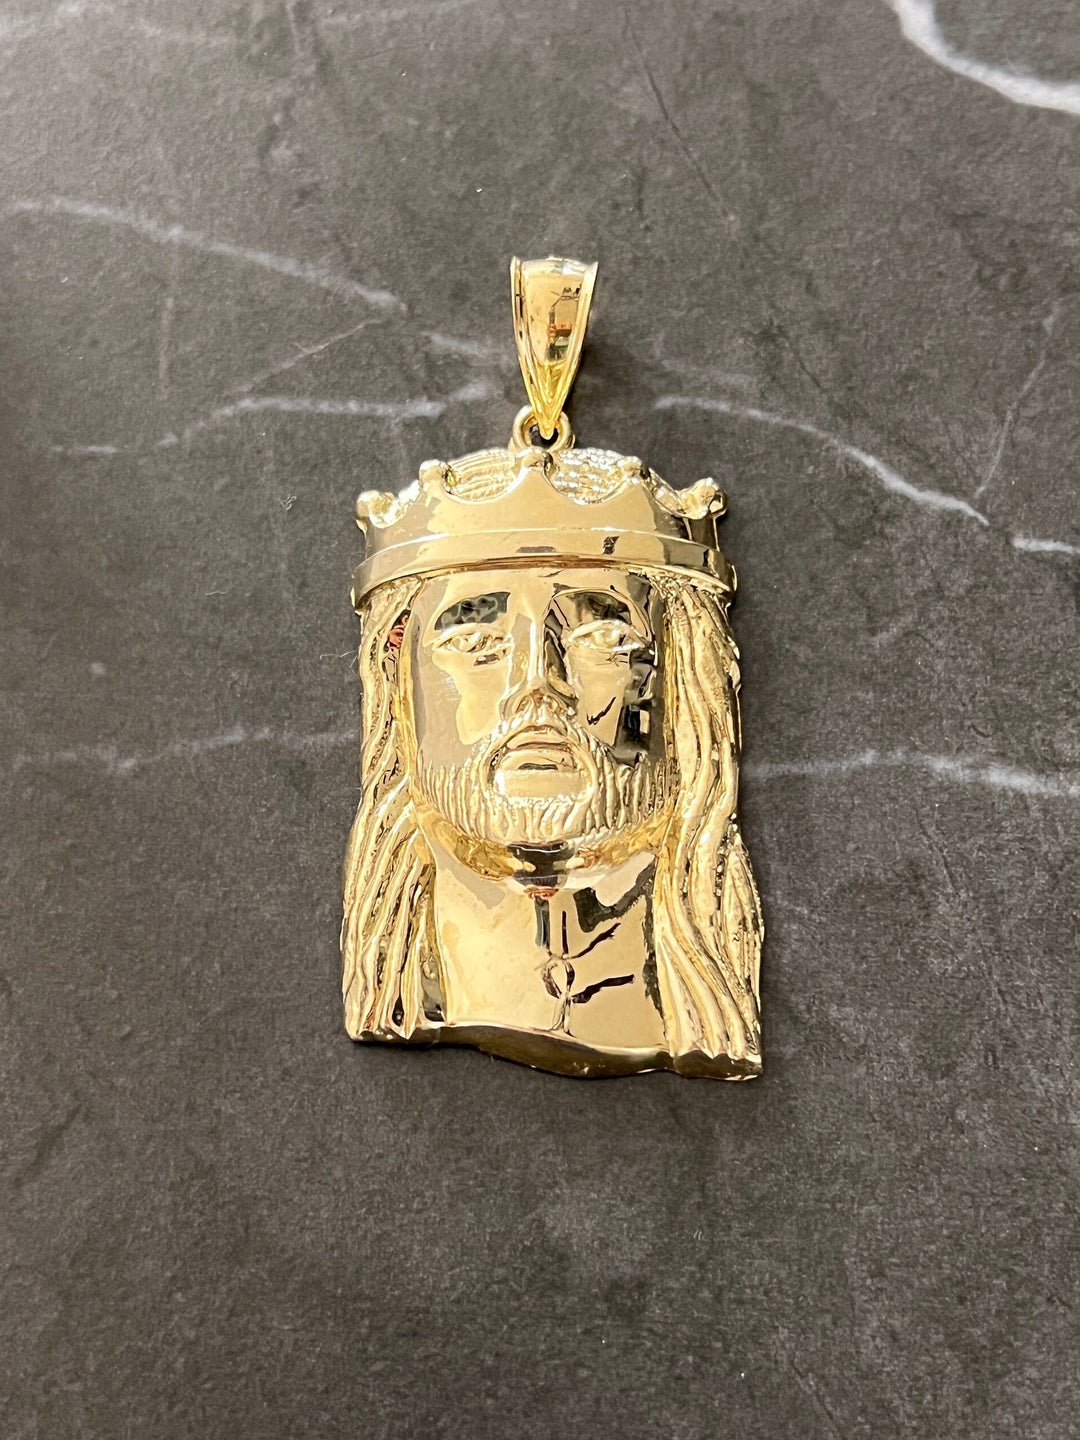 10K Authentic Yellow Gold Textured Jesus Face/Head Religious Charm/Pendant, Real Gold Religious Jewelry of the Face of Jesus with Gold Crown